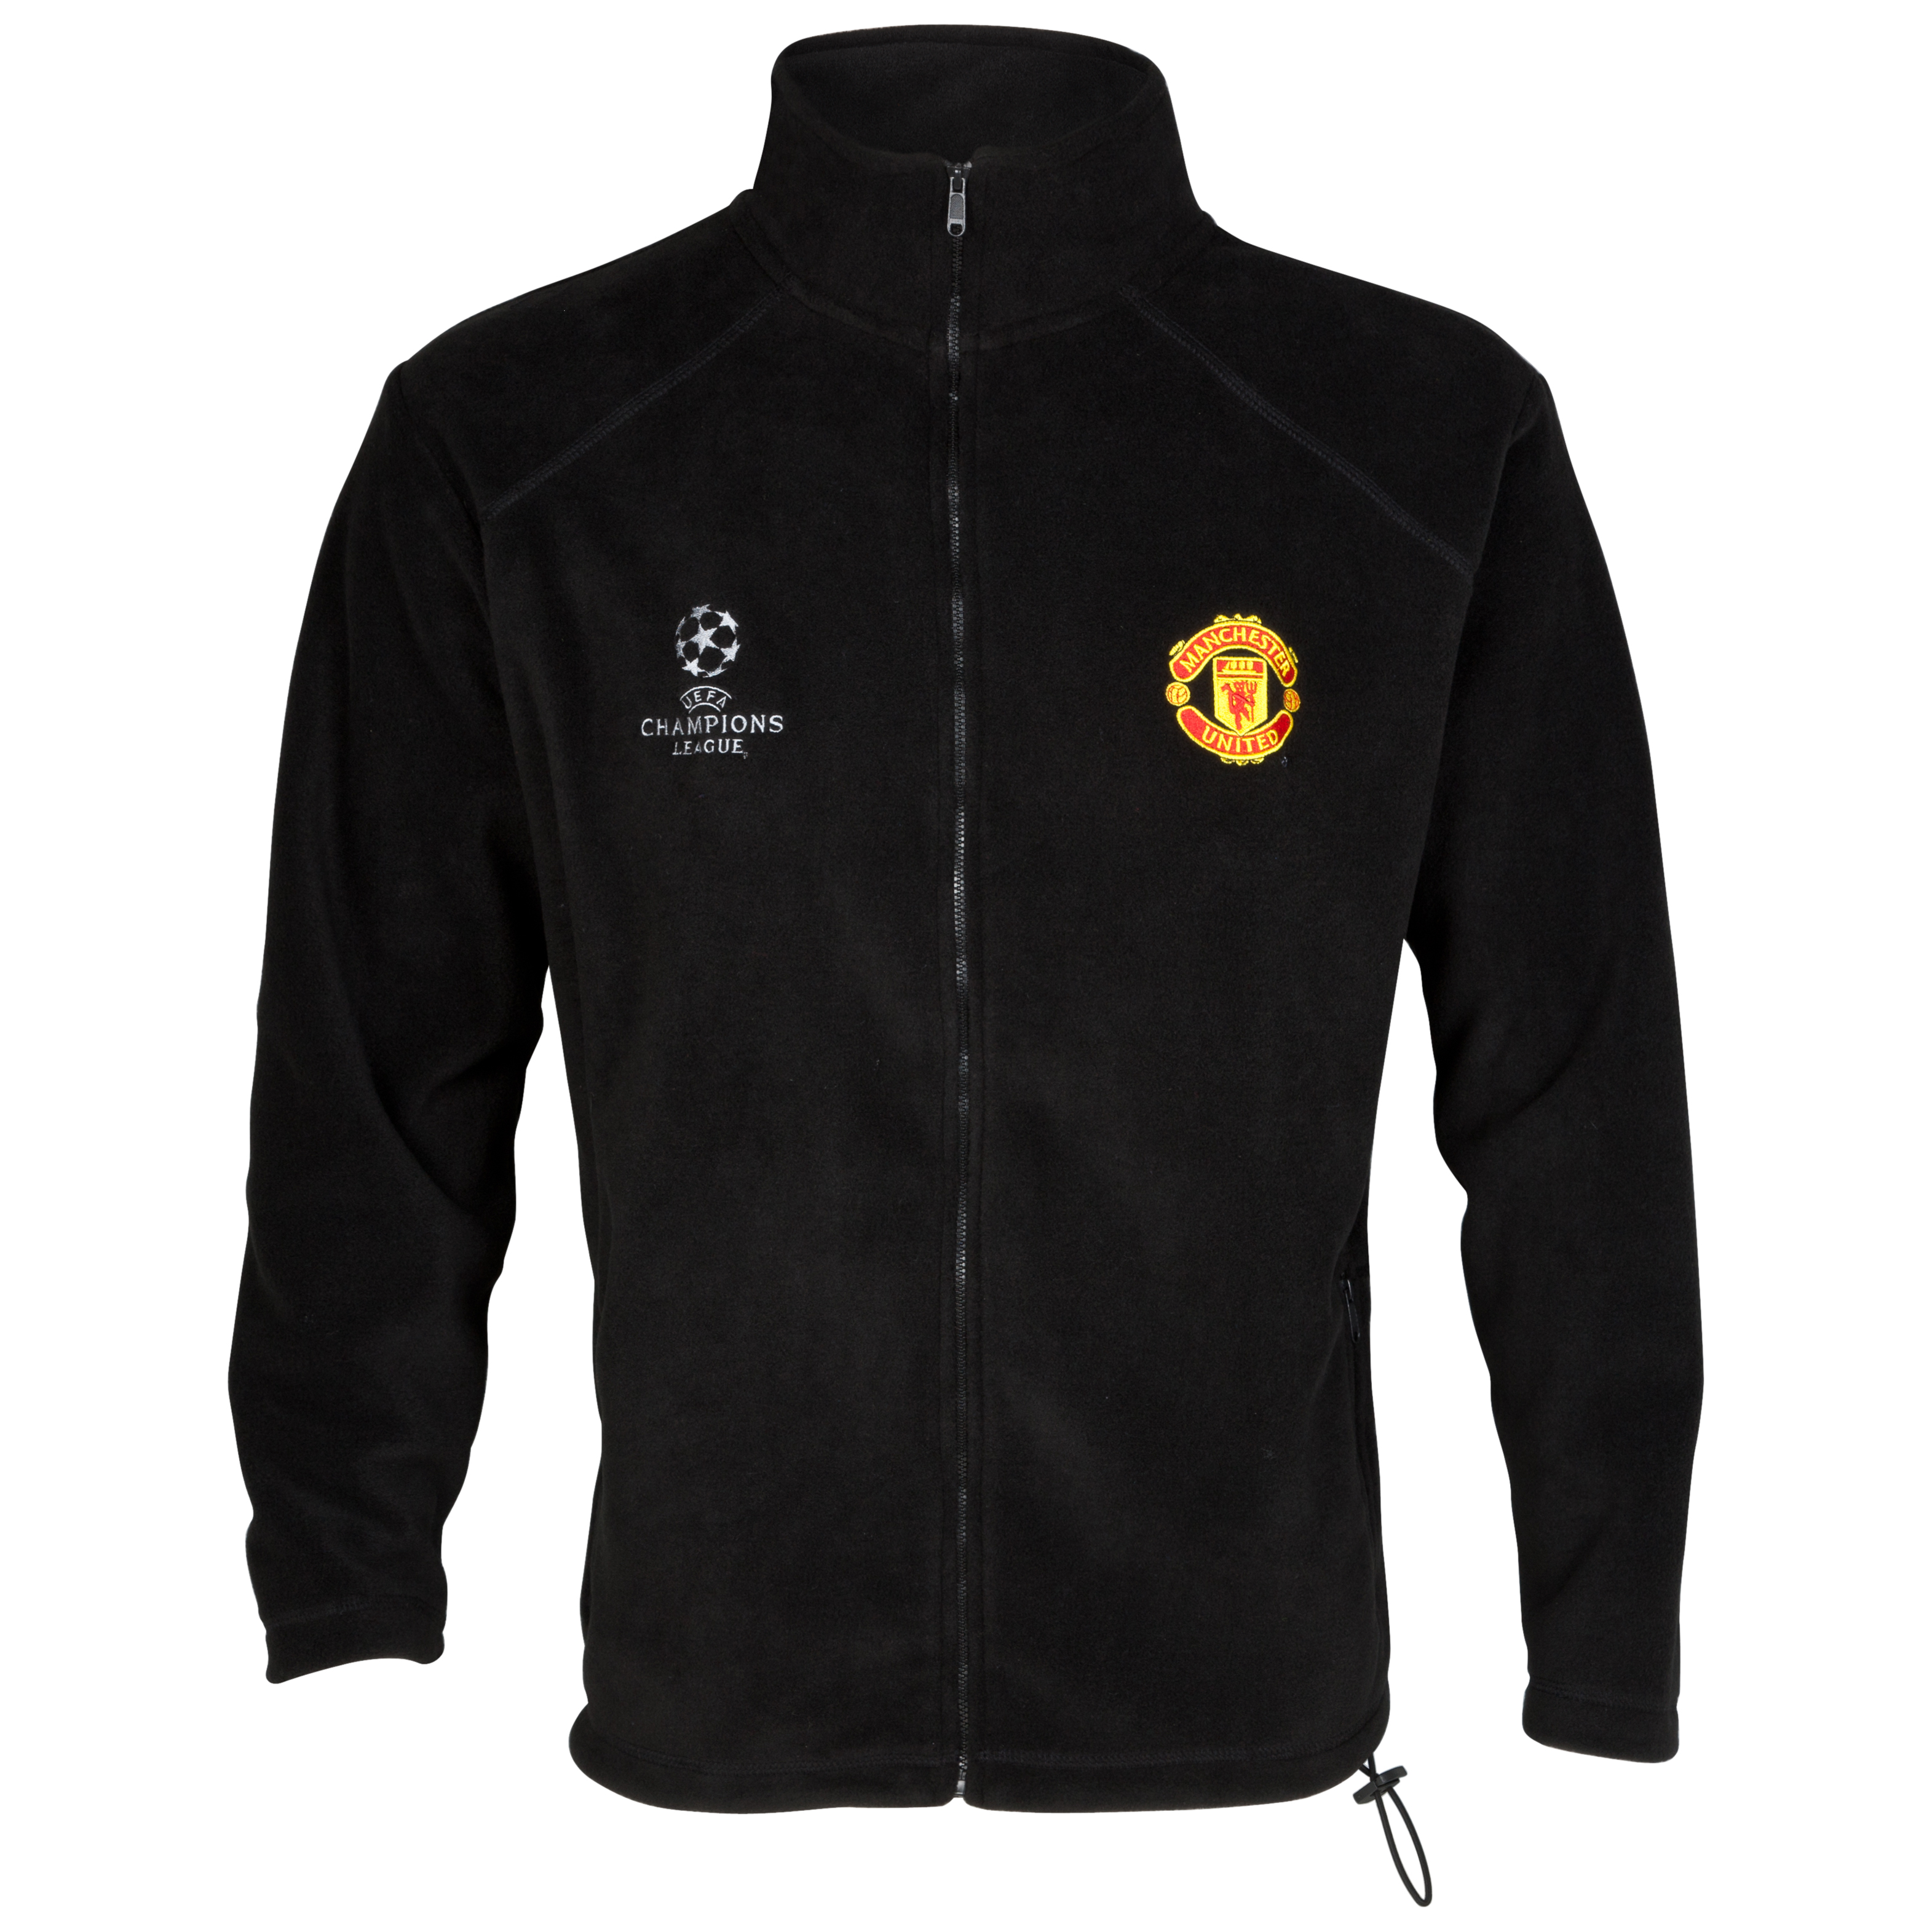 Manchester United UEFA Champions League Embroidered Fleece Jacket - Black